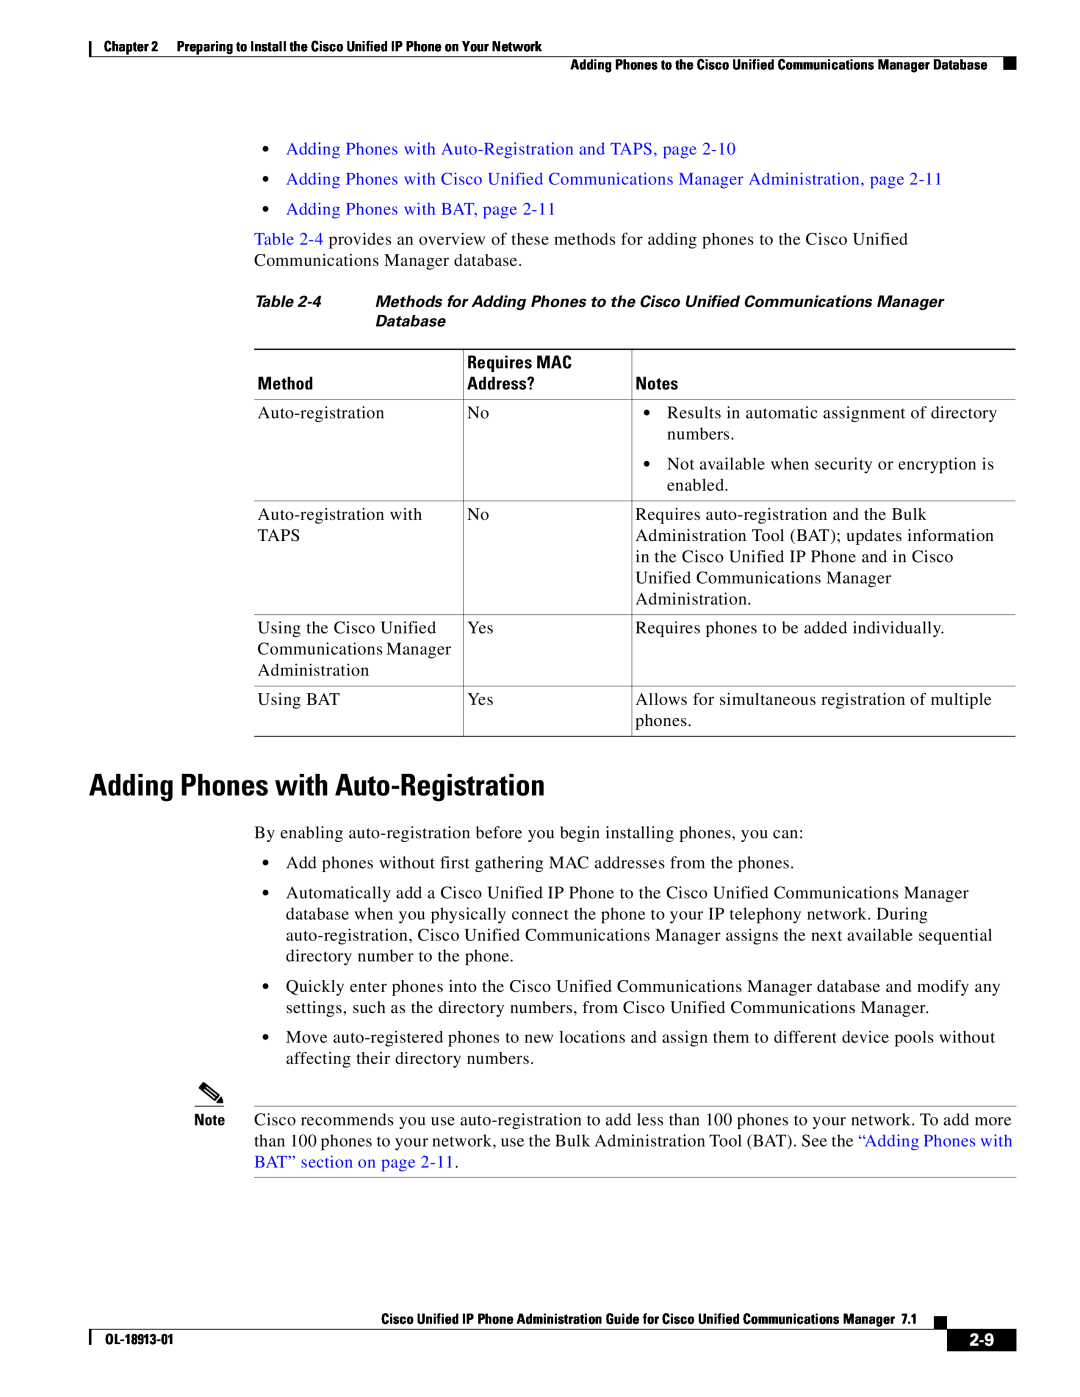 Cisco Systems 71 manual Adding Phones with Auto-Registration and TAPS, page, Adding Phones with BAT, page, Requires MAC 